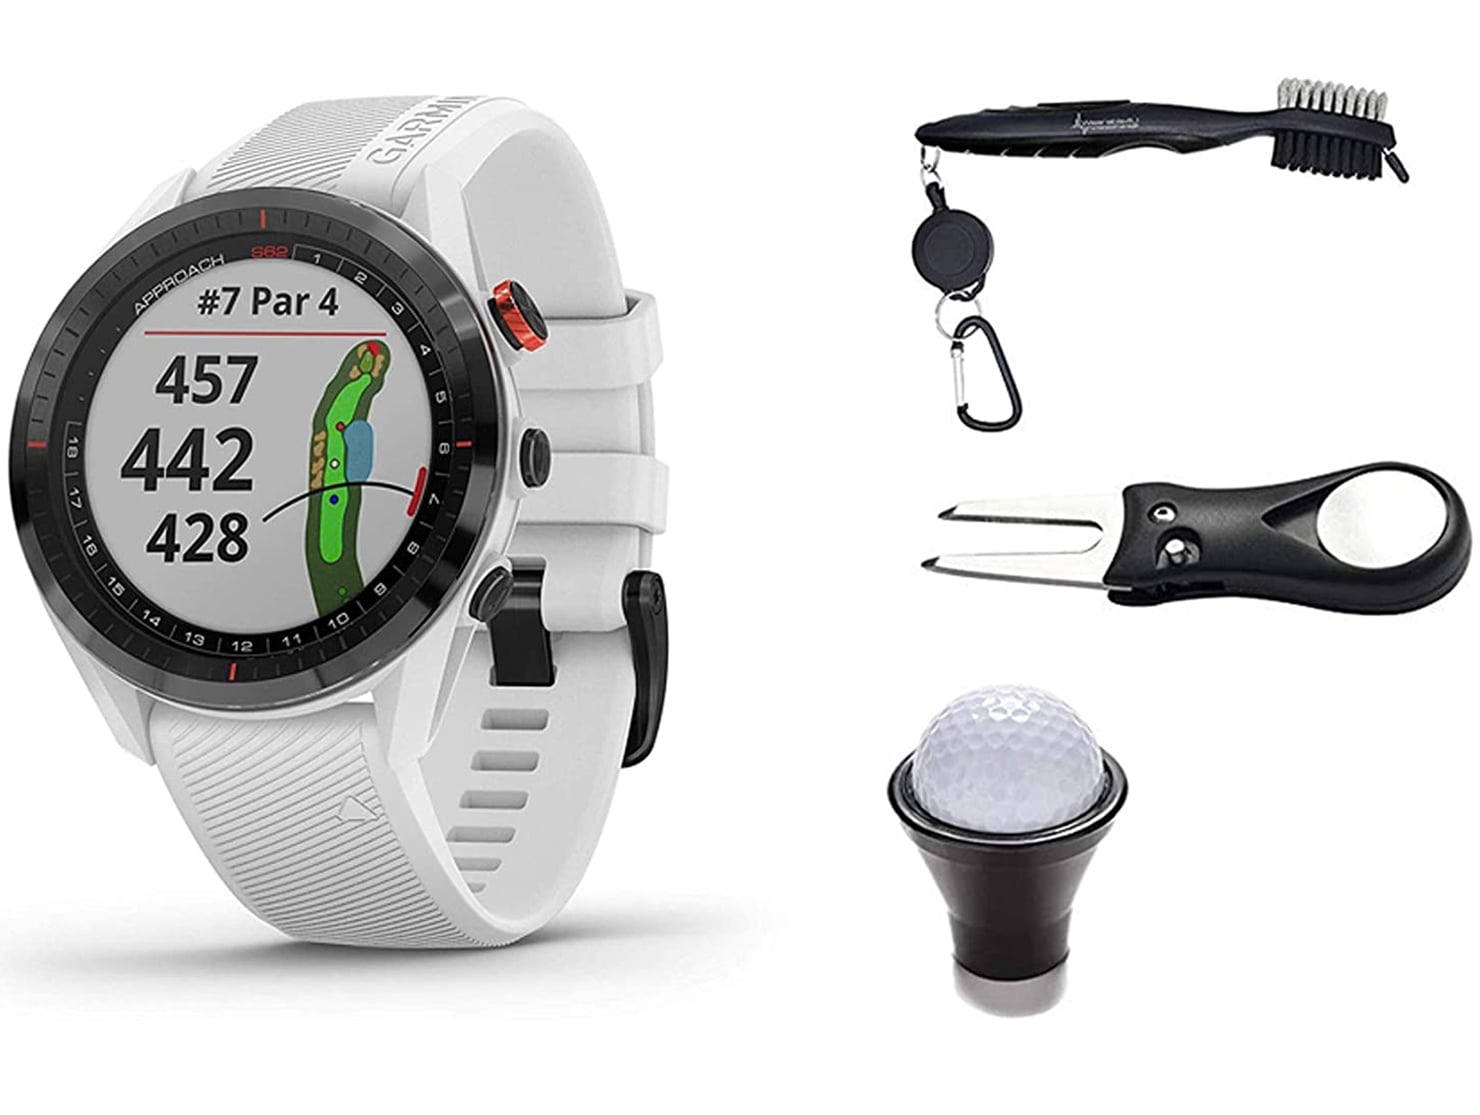 Garmin Approach S62 Premium GPS Golf Watch and All-In-One Golf